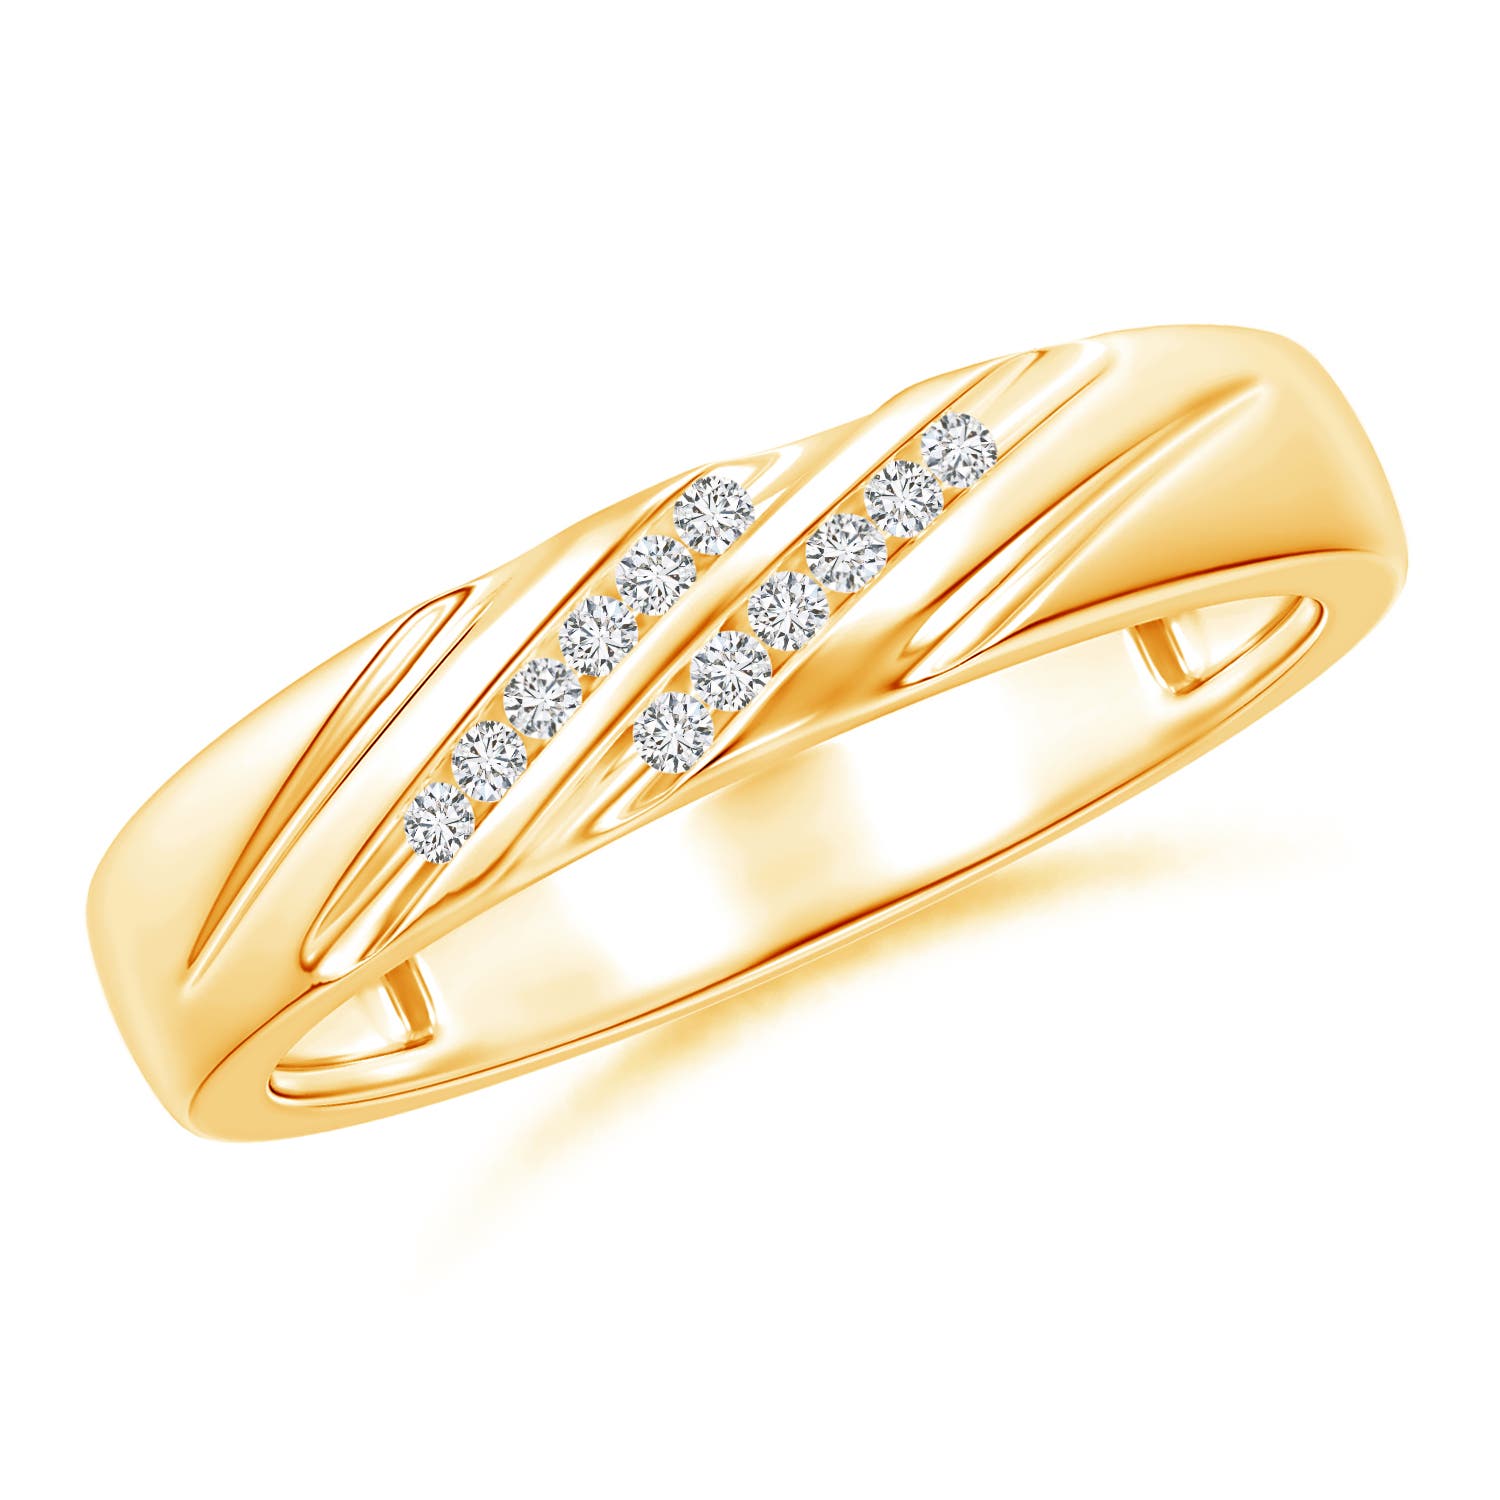 H, SI2 / 0.08 CT / 14 KT Yellow Gold